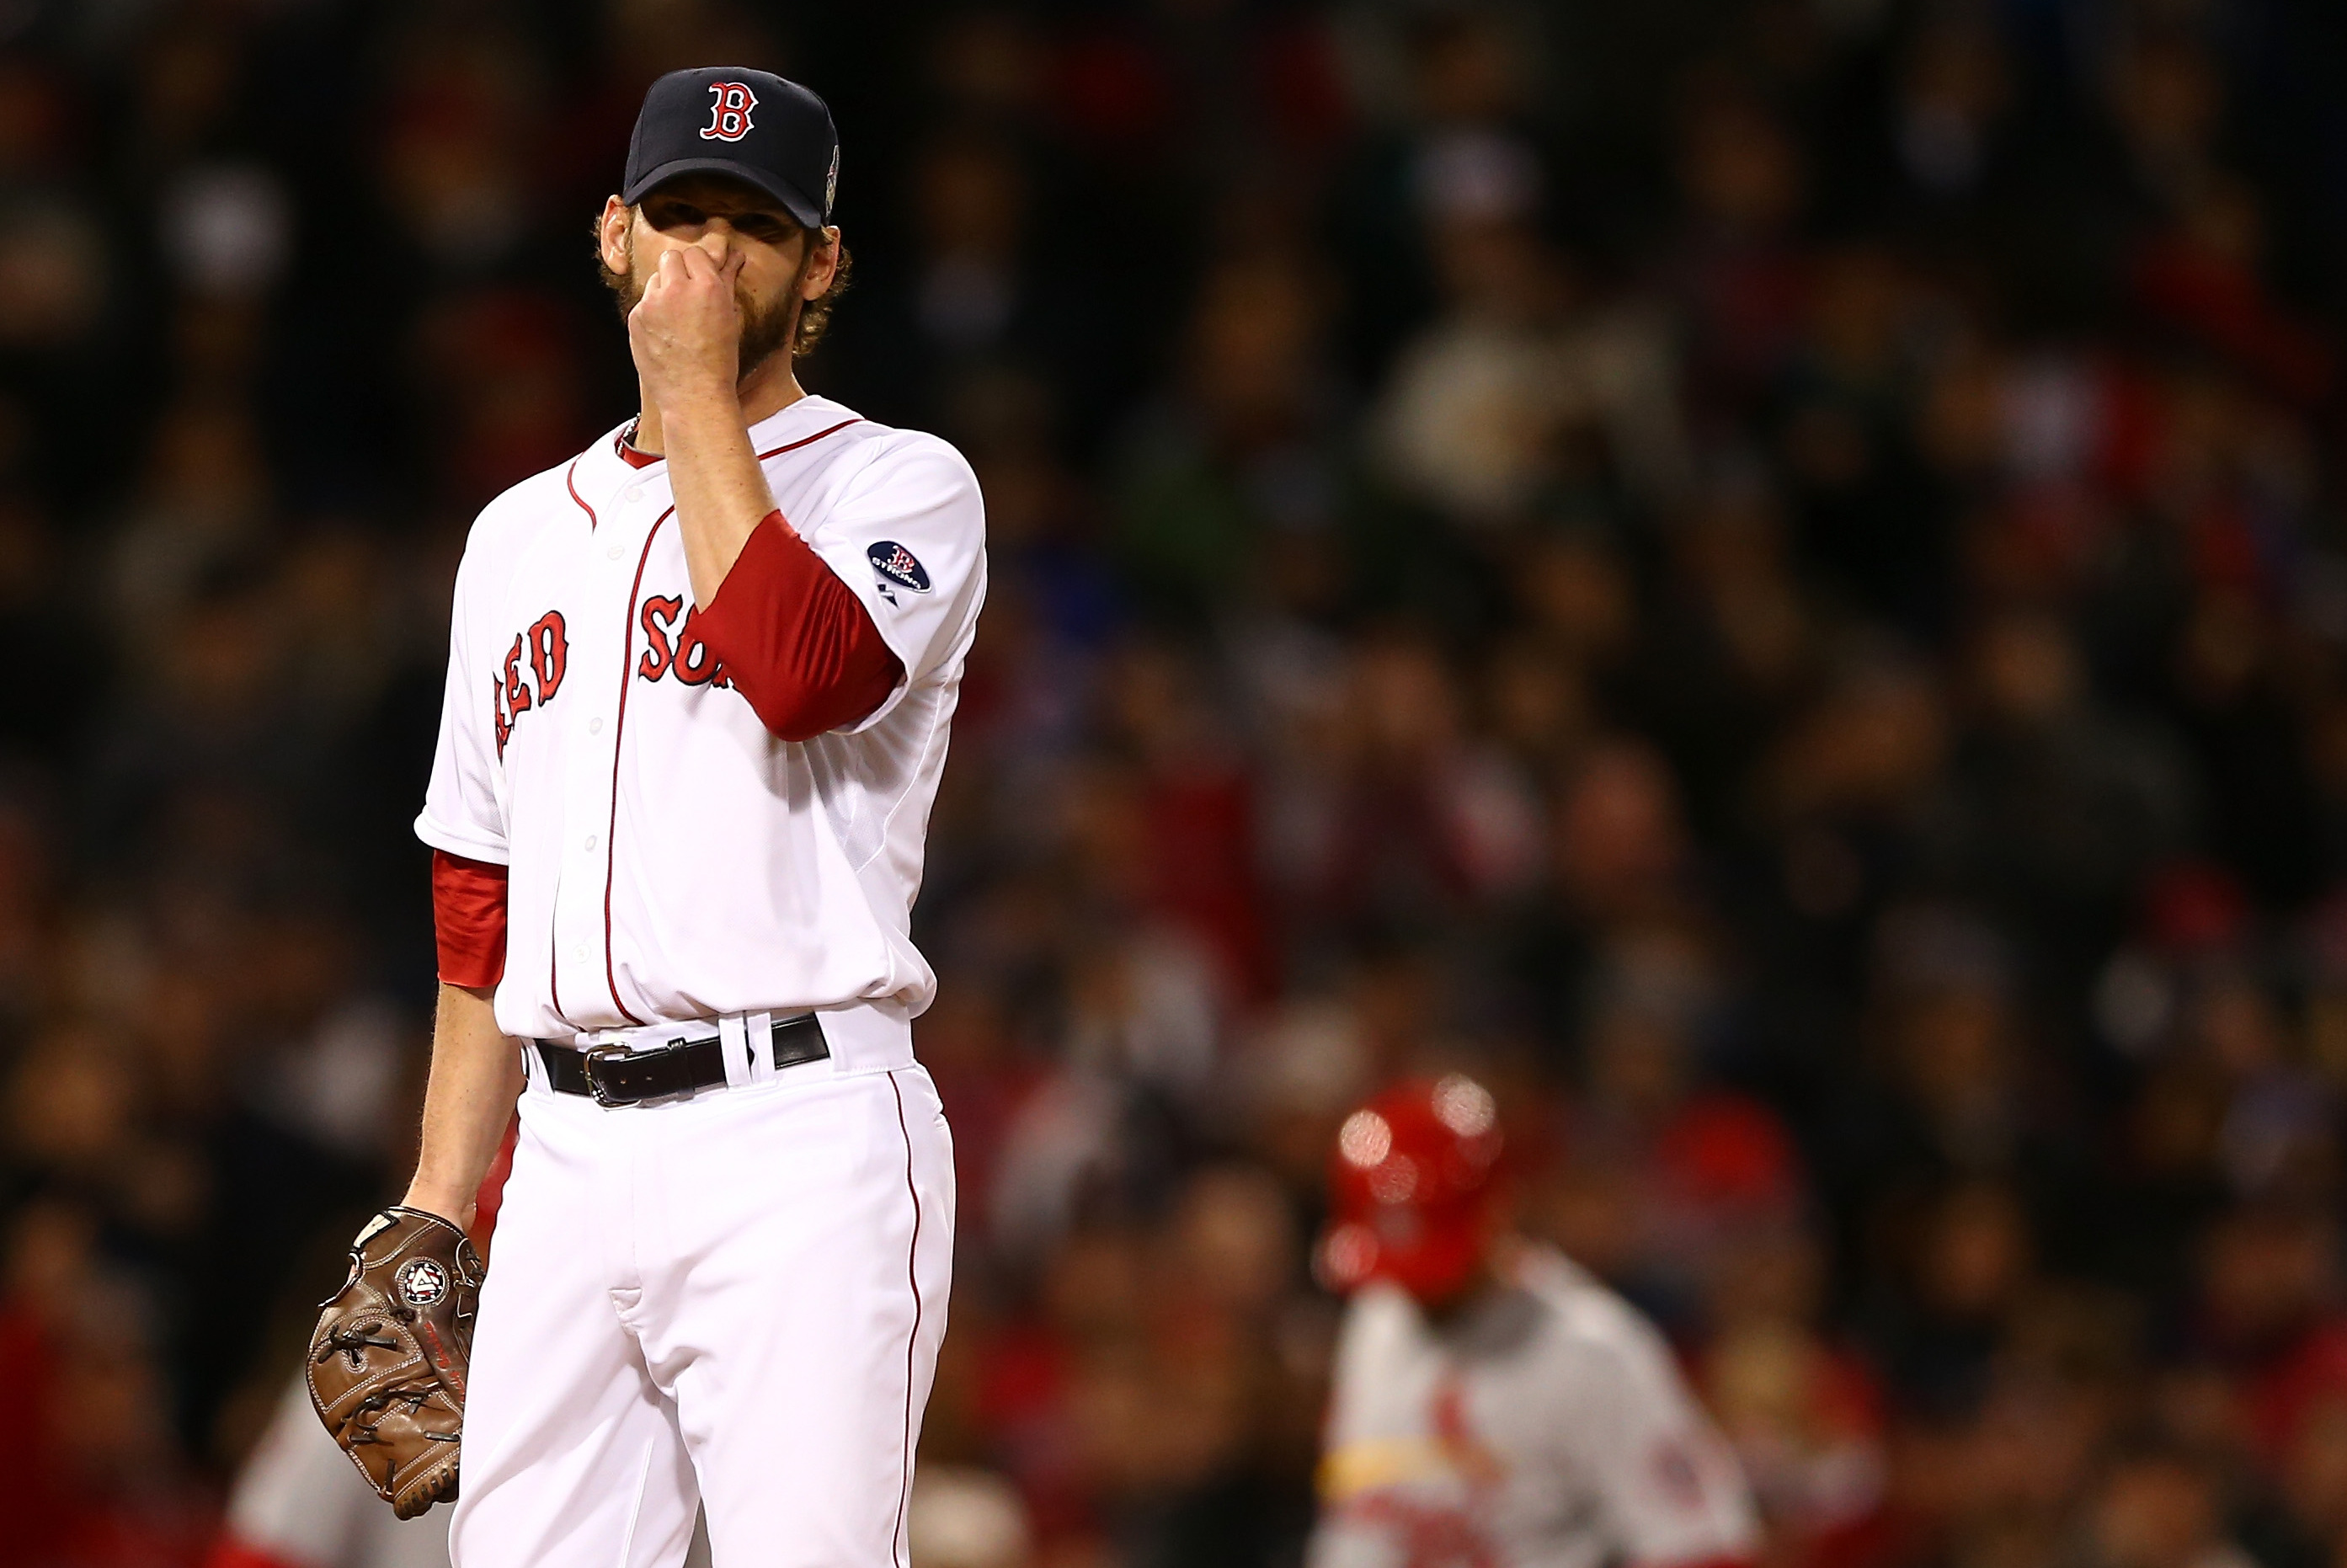 CT native, Yale grad Craig Breslow candidate for Red Sox job